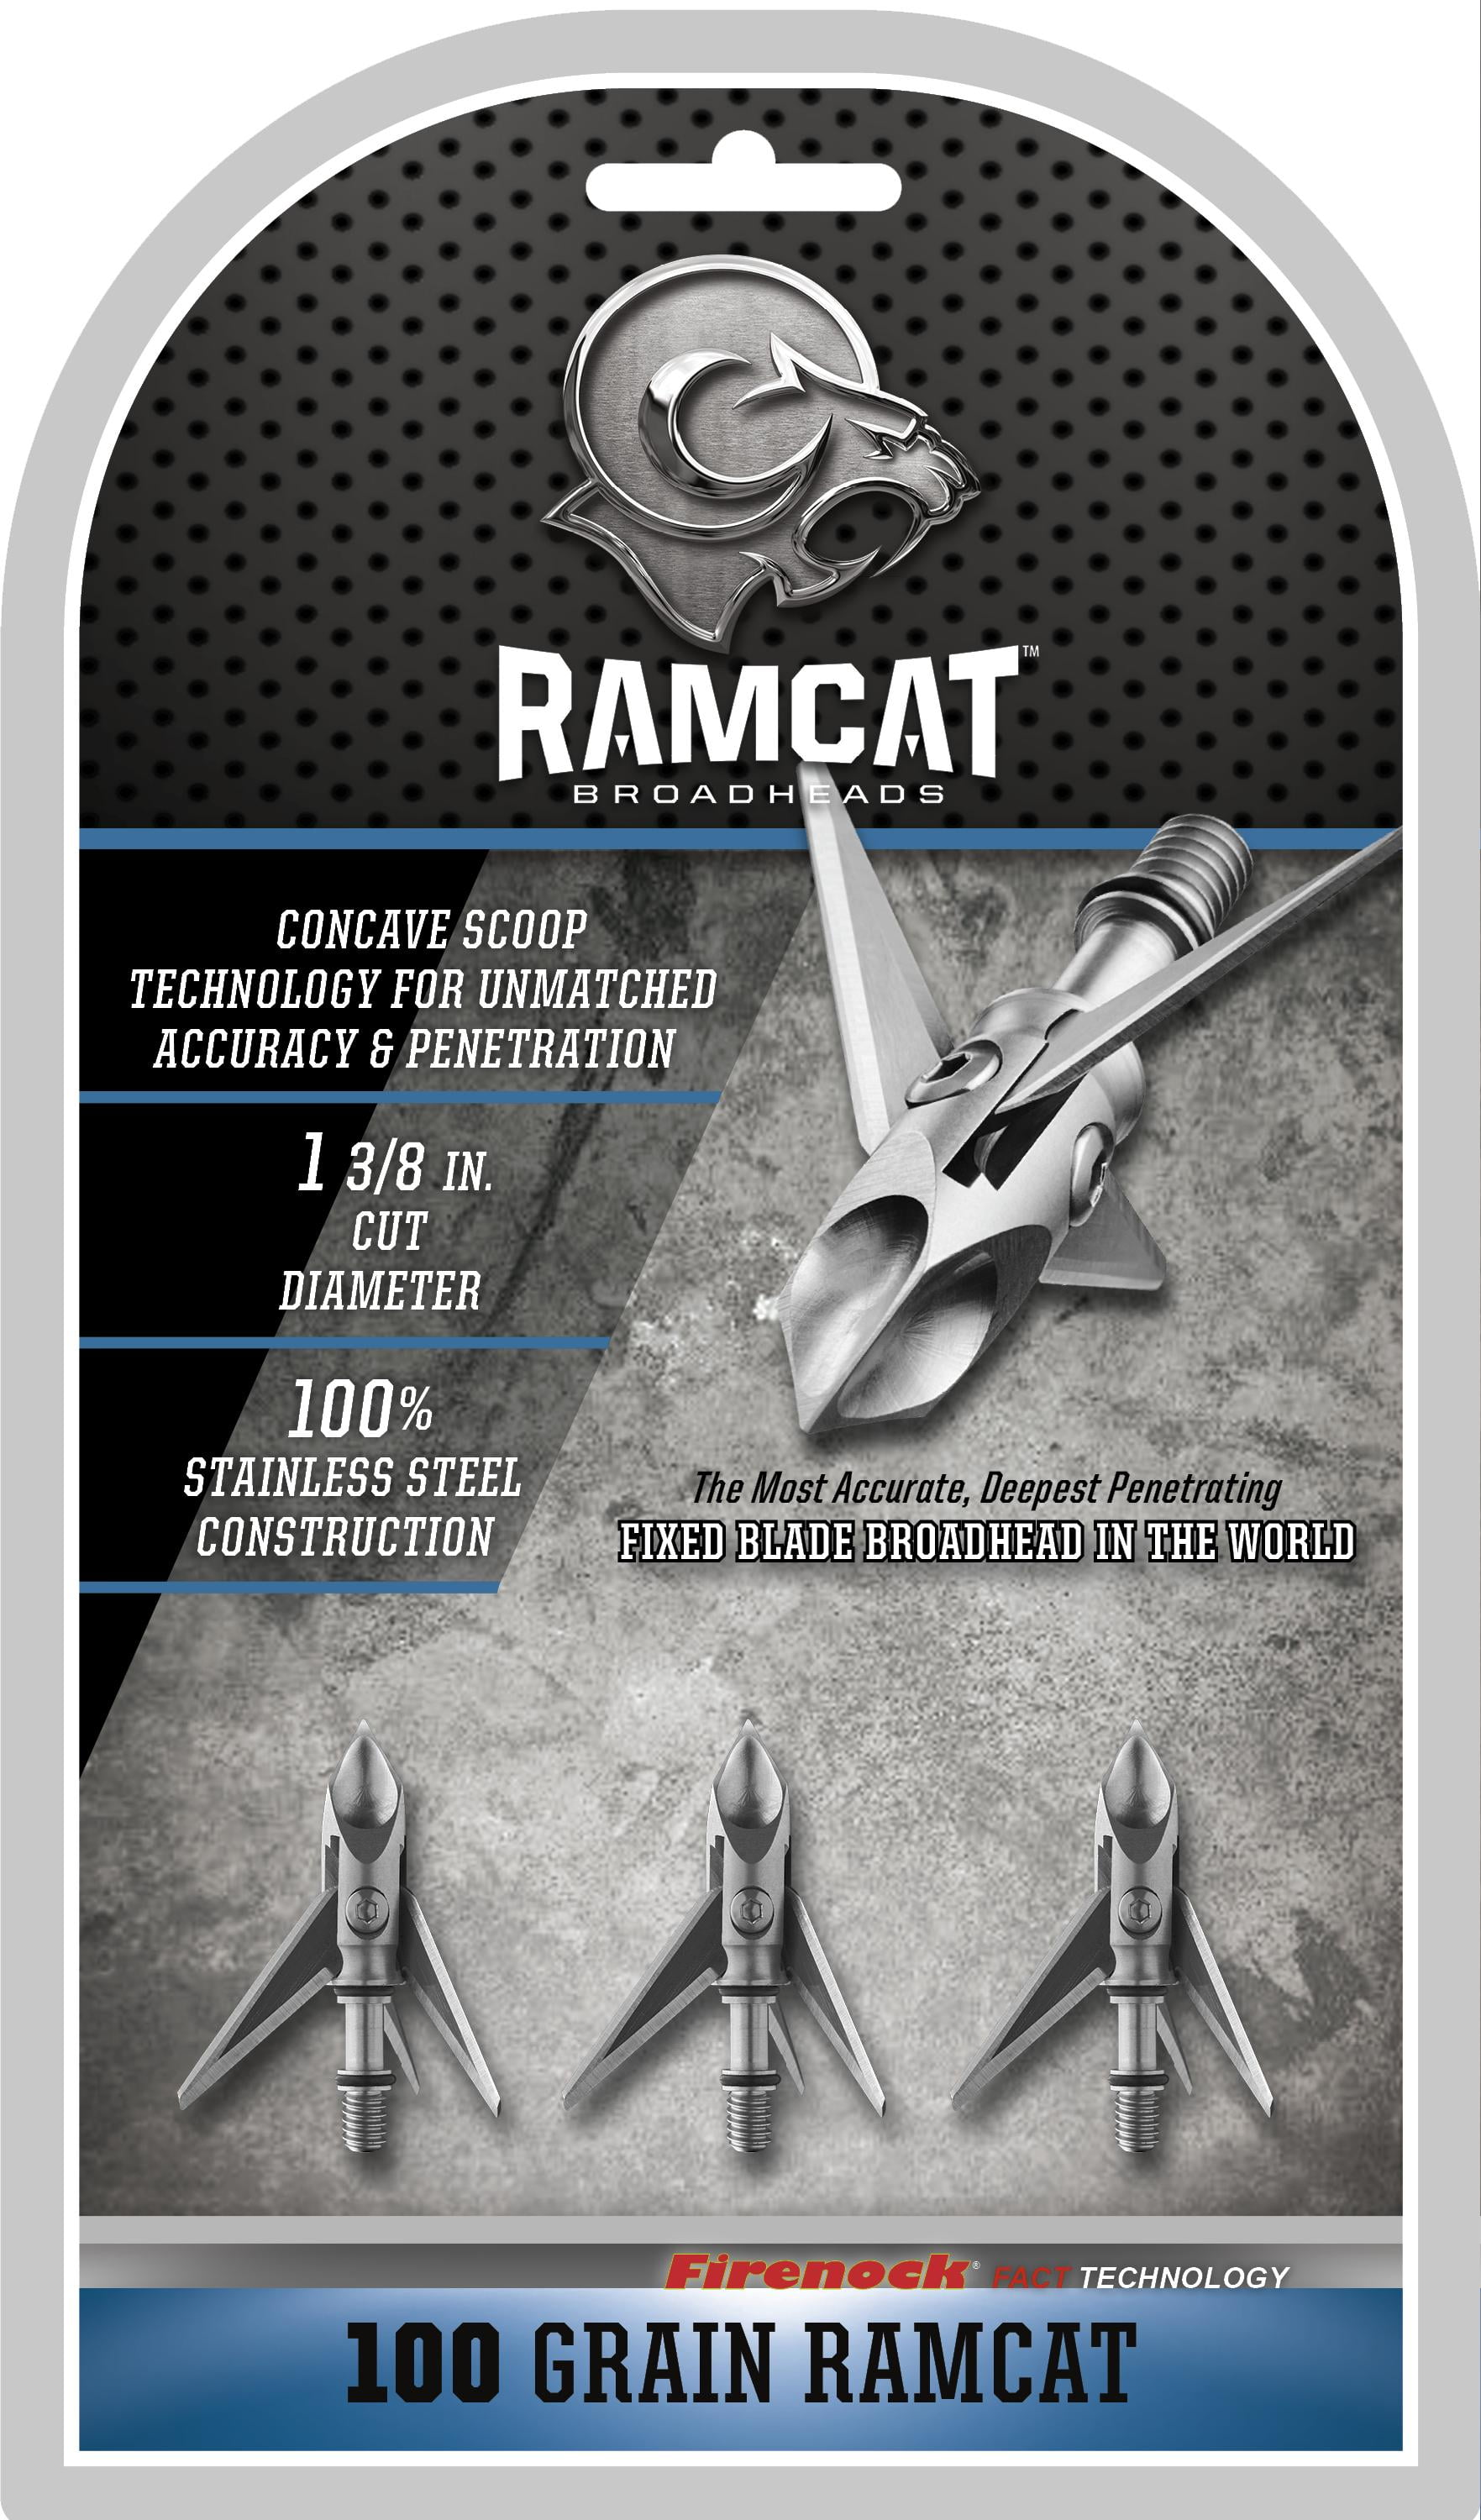 NEW 12pk Ramcat Broadhead 100gr 3blade Archery Hunting for Compound Bow Crossbow 